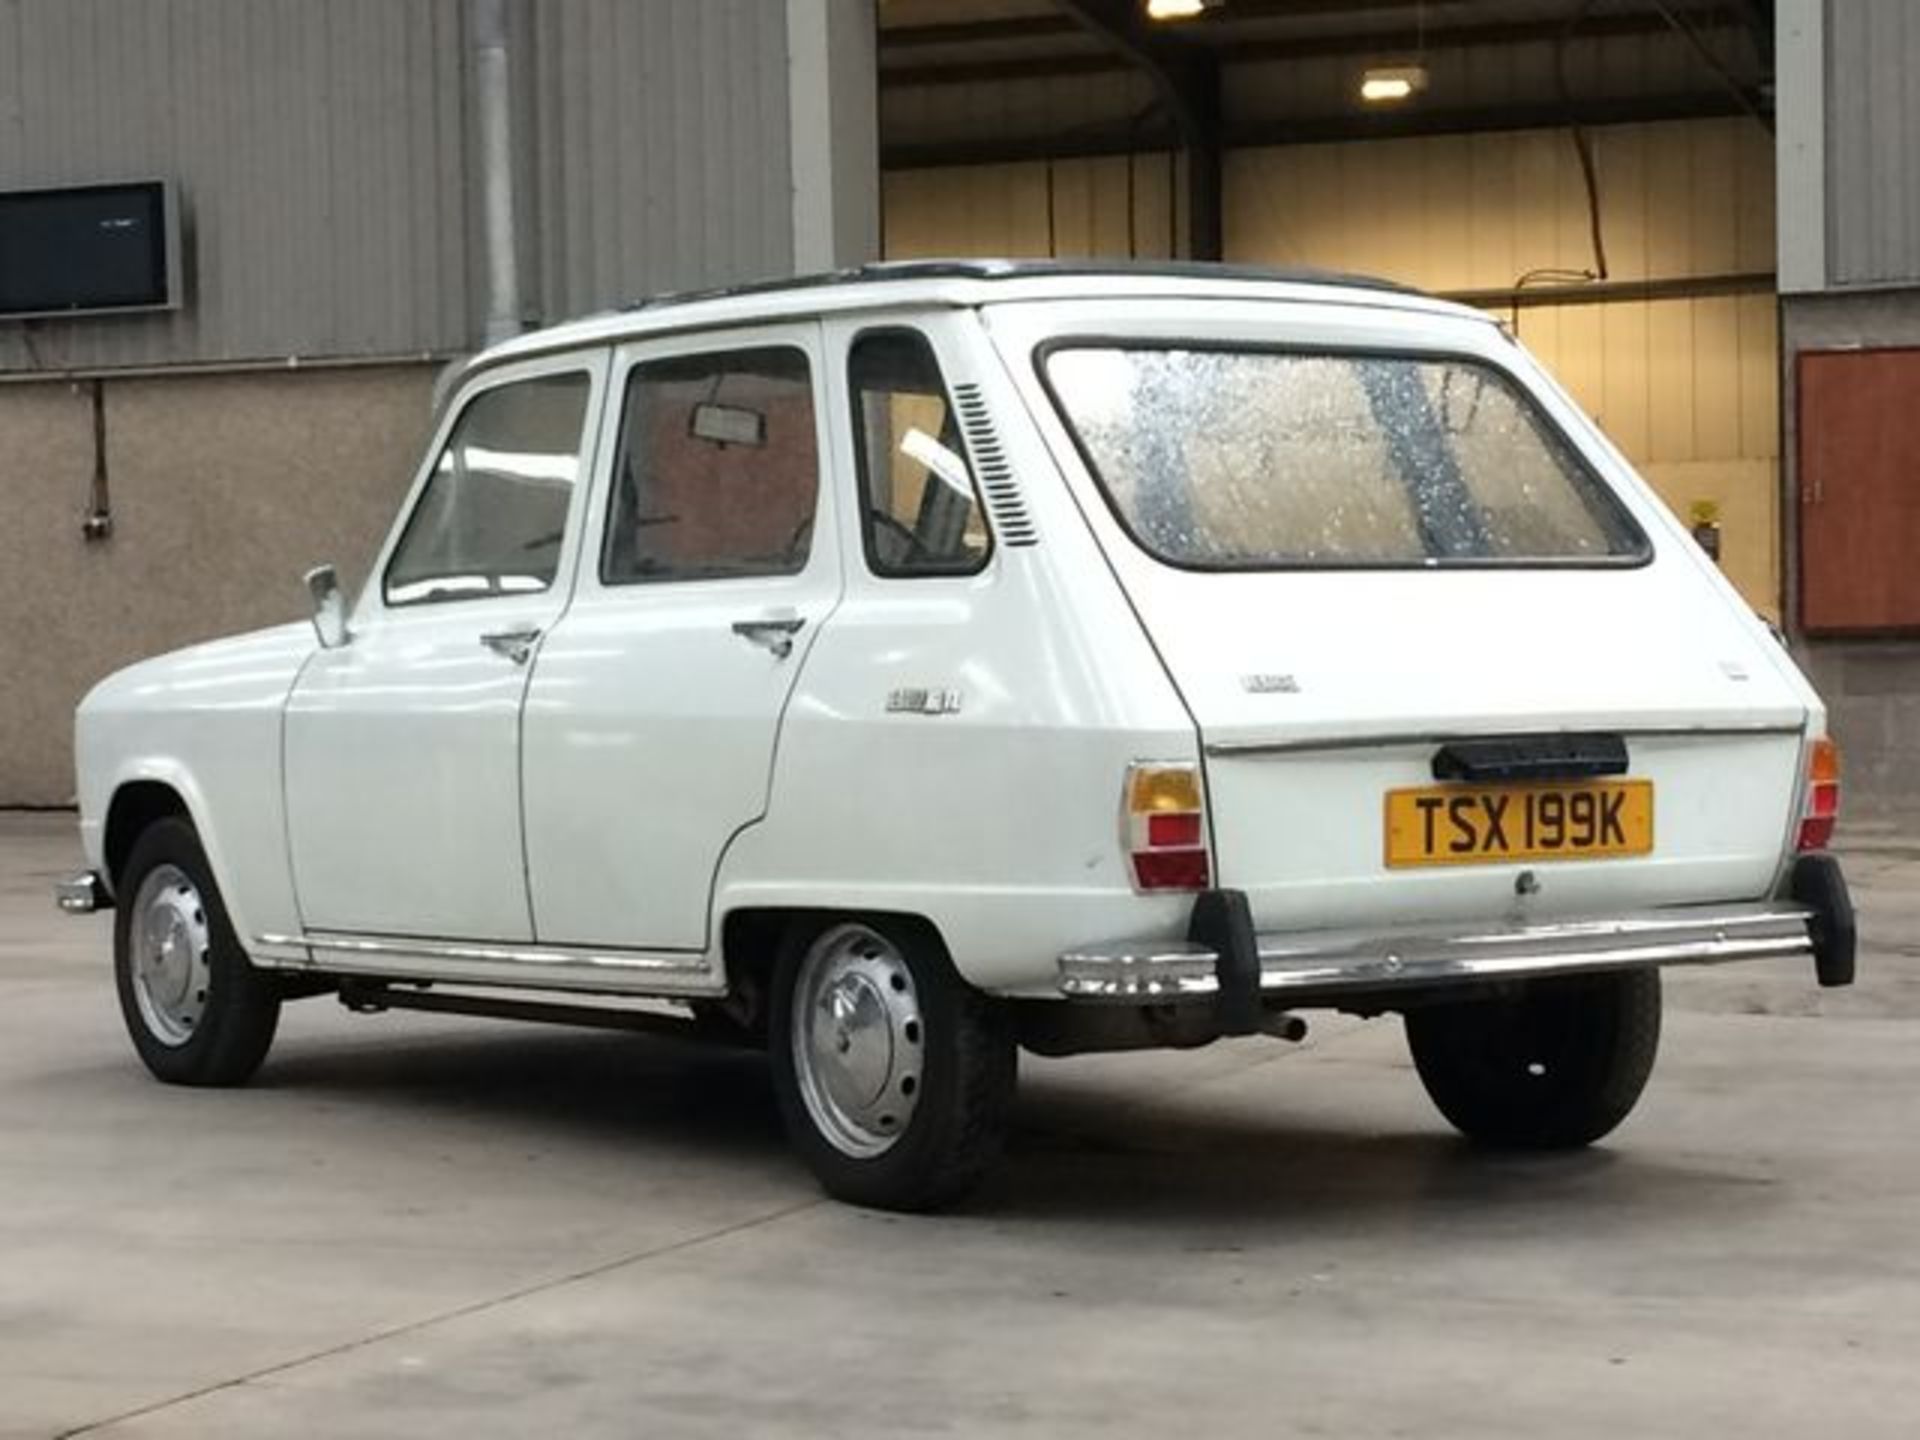 RENAULT 6 TL - 1108cc - Image 22 of 34